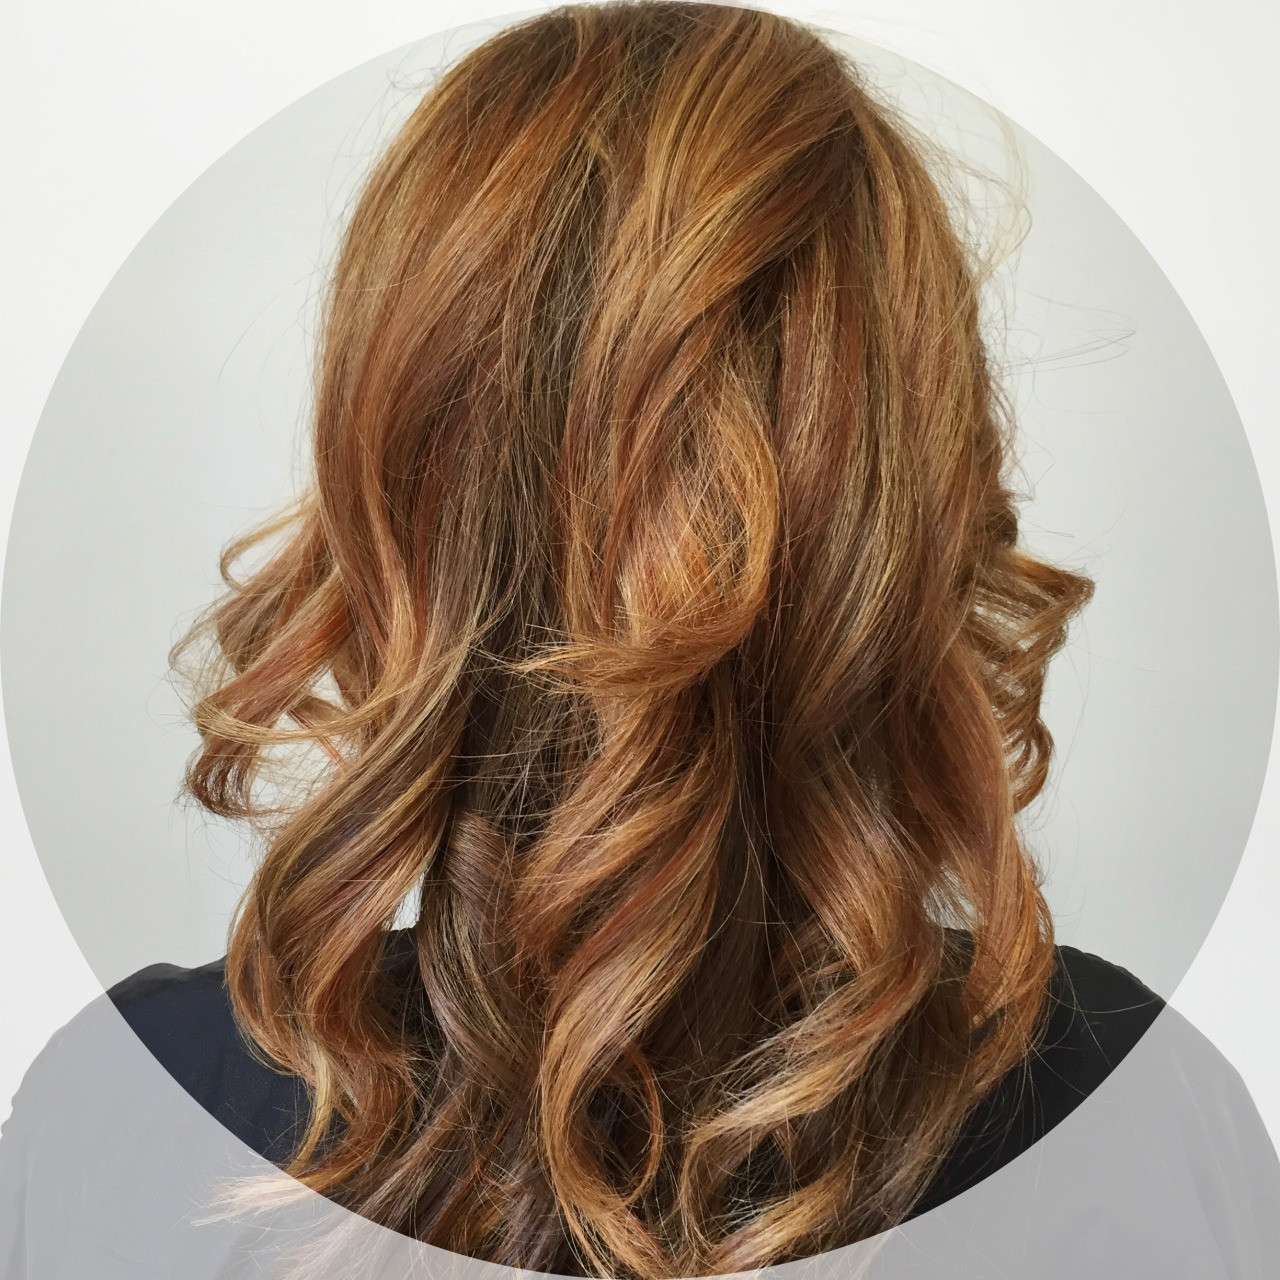 Hair By Rachel Dillon Golden Blonde Highlights And Copper Red